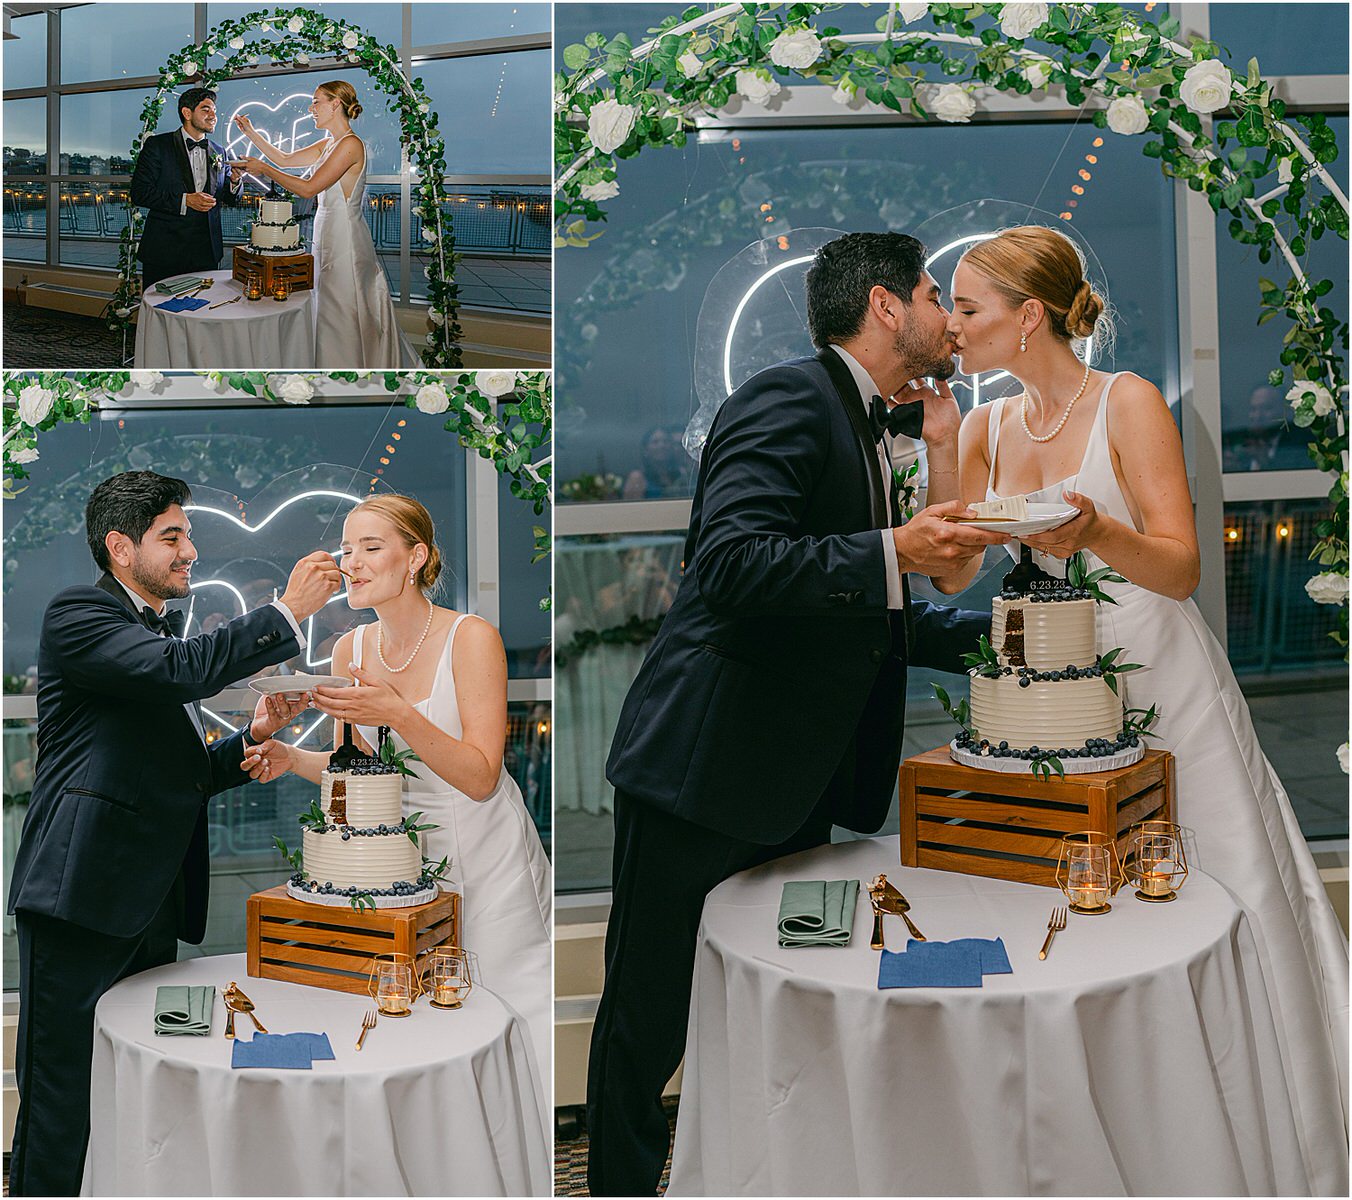 Couple enjoy their wedding cake together for Rachel Campbell Photography